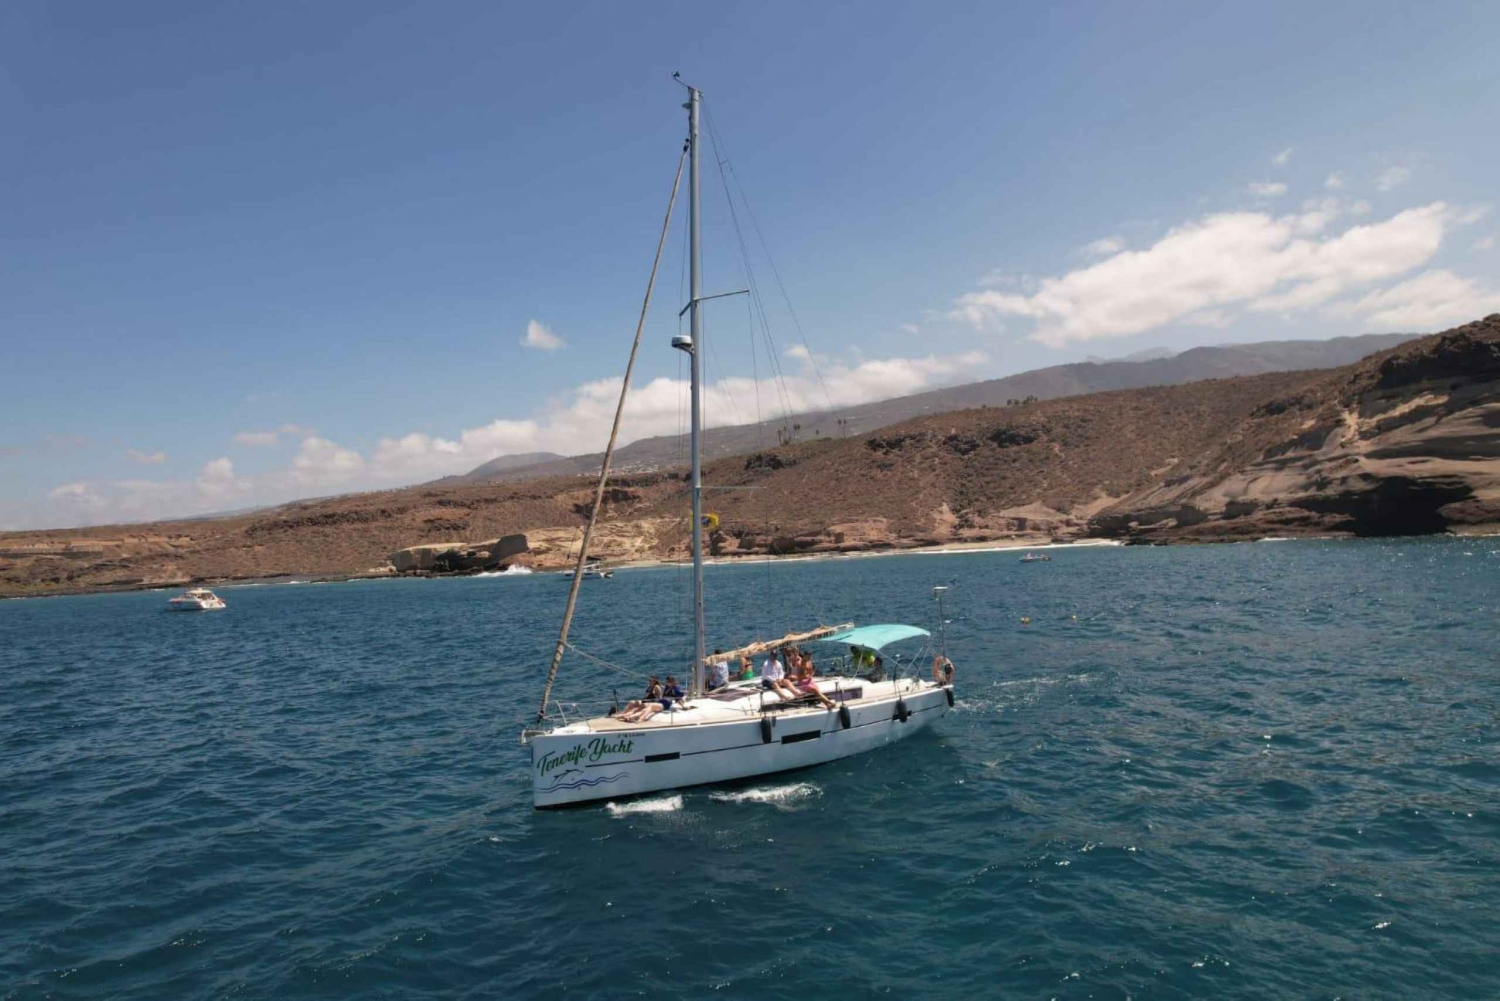 Tenerife: Whale watching and Snorkeling Yacht Trip